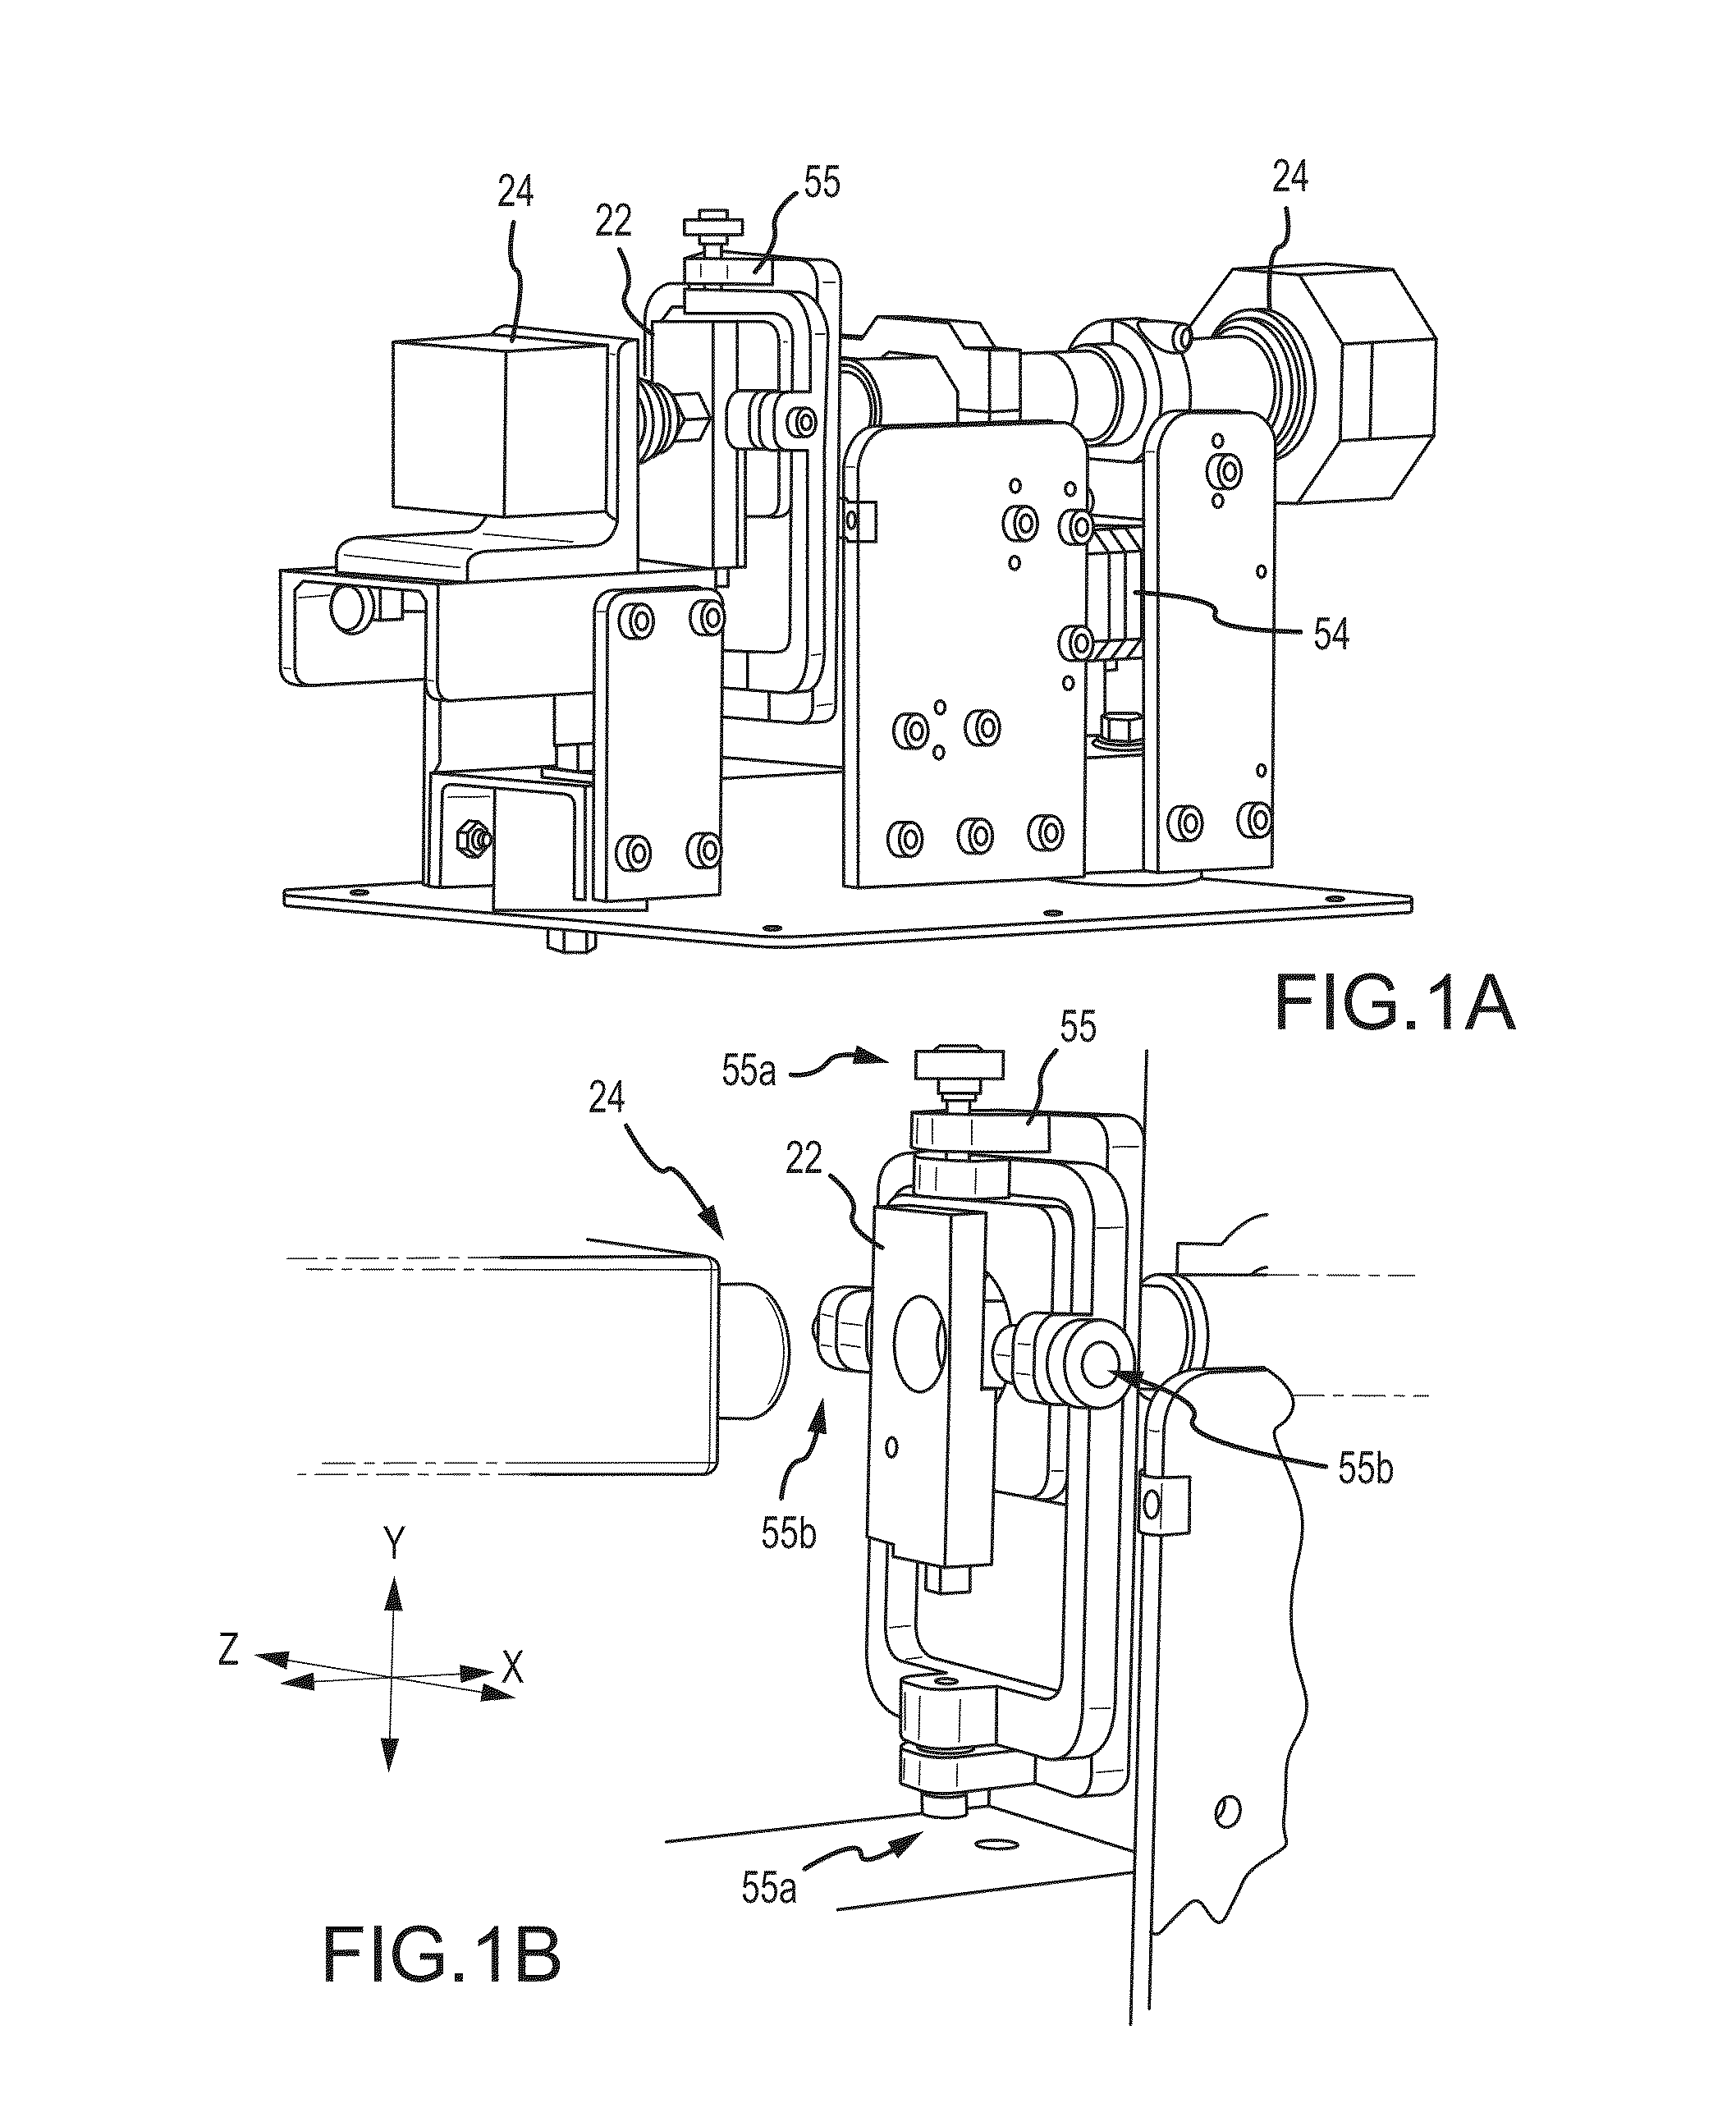 Flowcell, sheath fluid, and autofocus systems and methods for particle analysis in urine samples